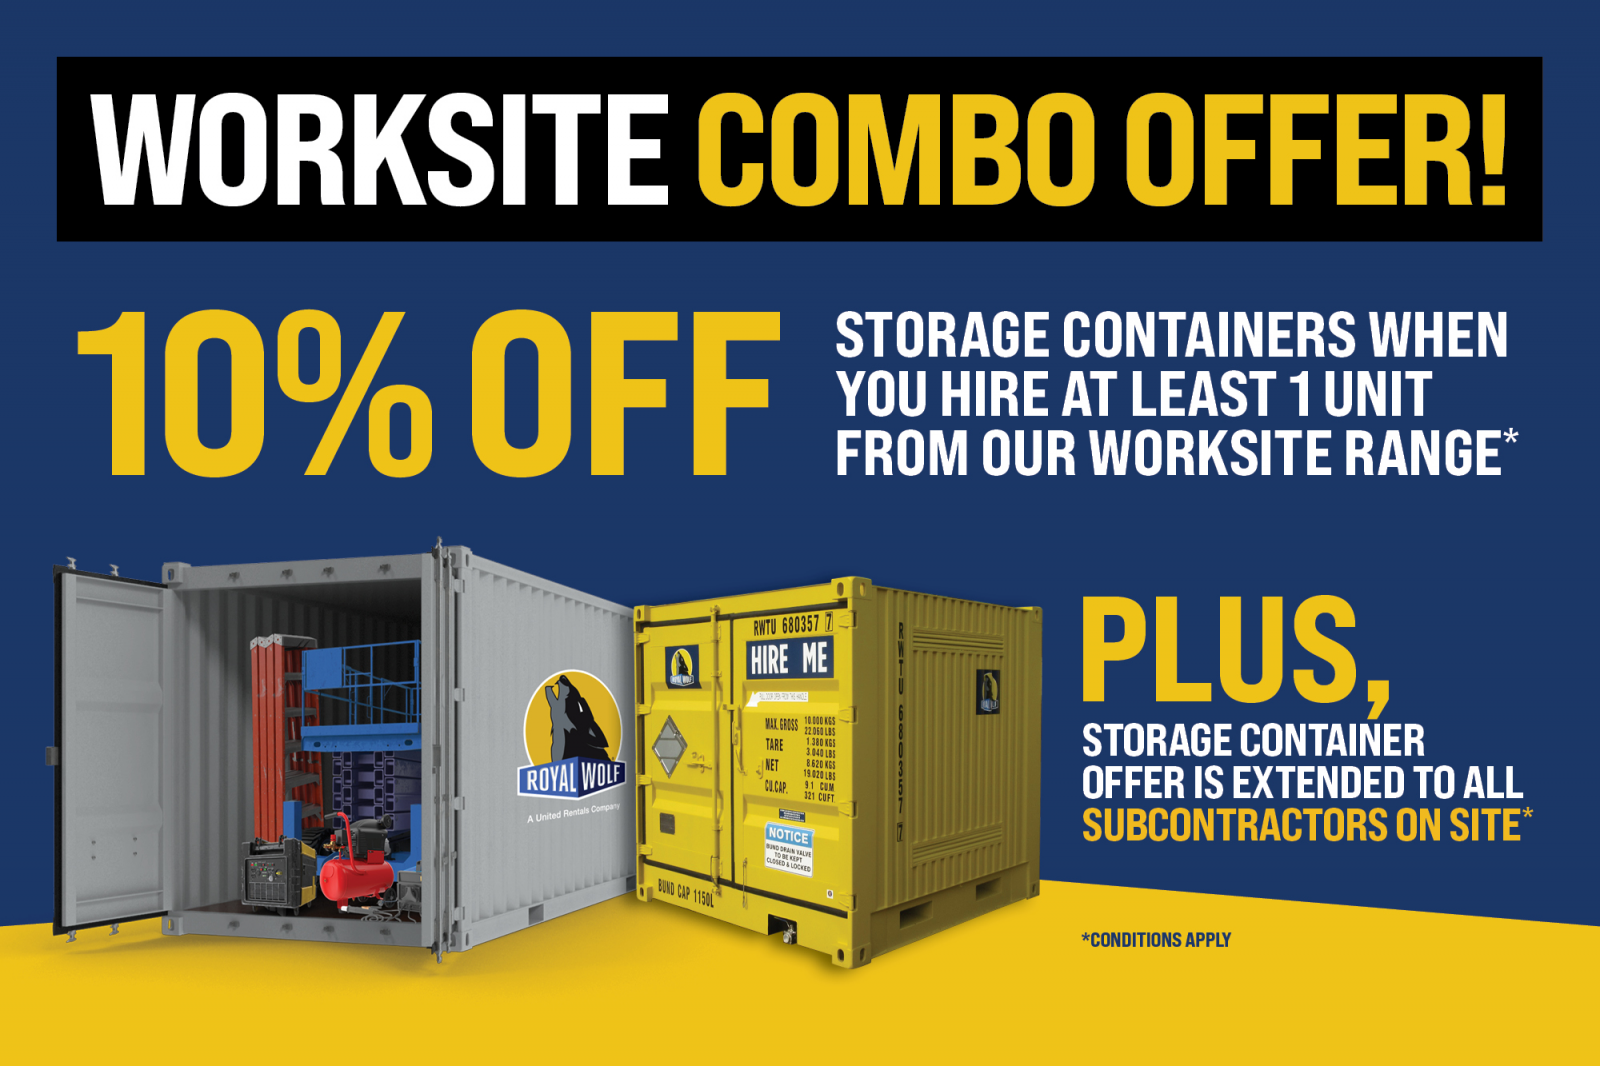 Worksite Combo Offer: 10% off storage containers when you hire at leasr 1 unit from our worksite range, plus, storage container offer extended to all subcontractors on site. Conditions apply.